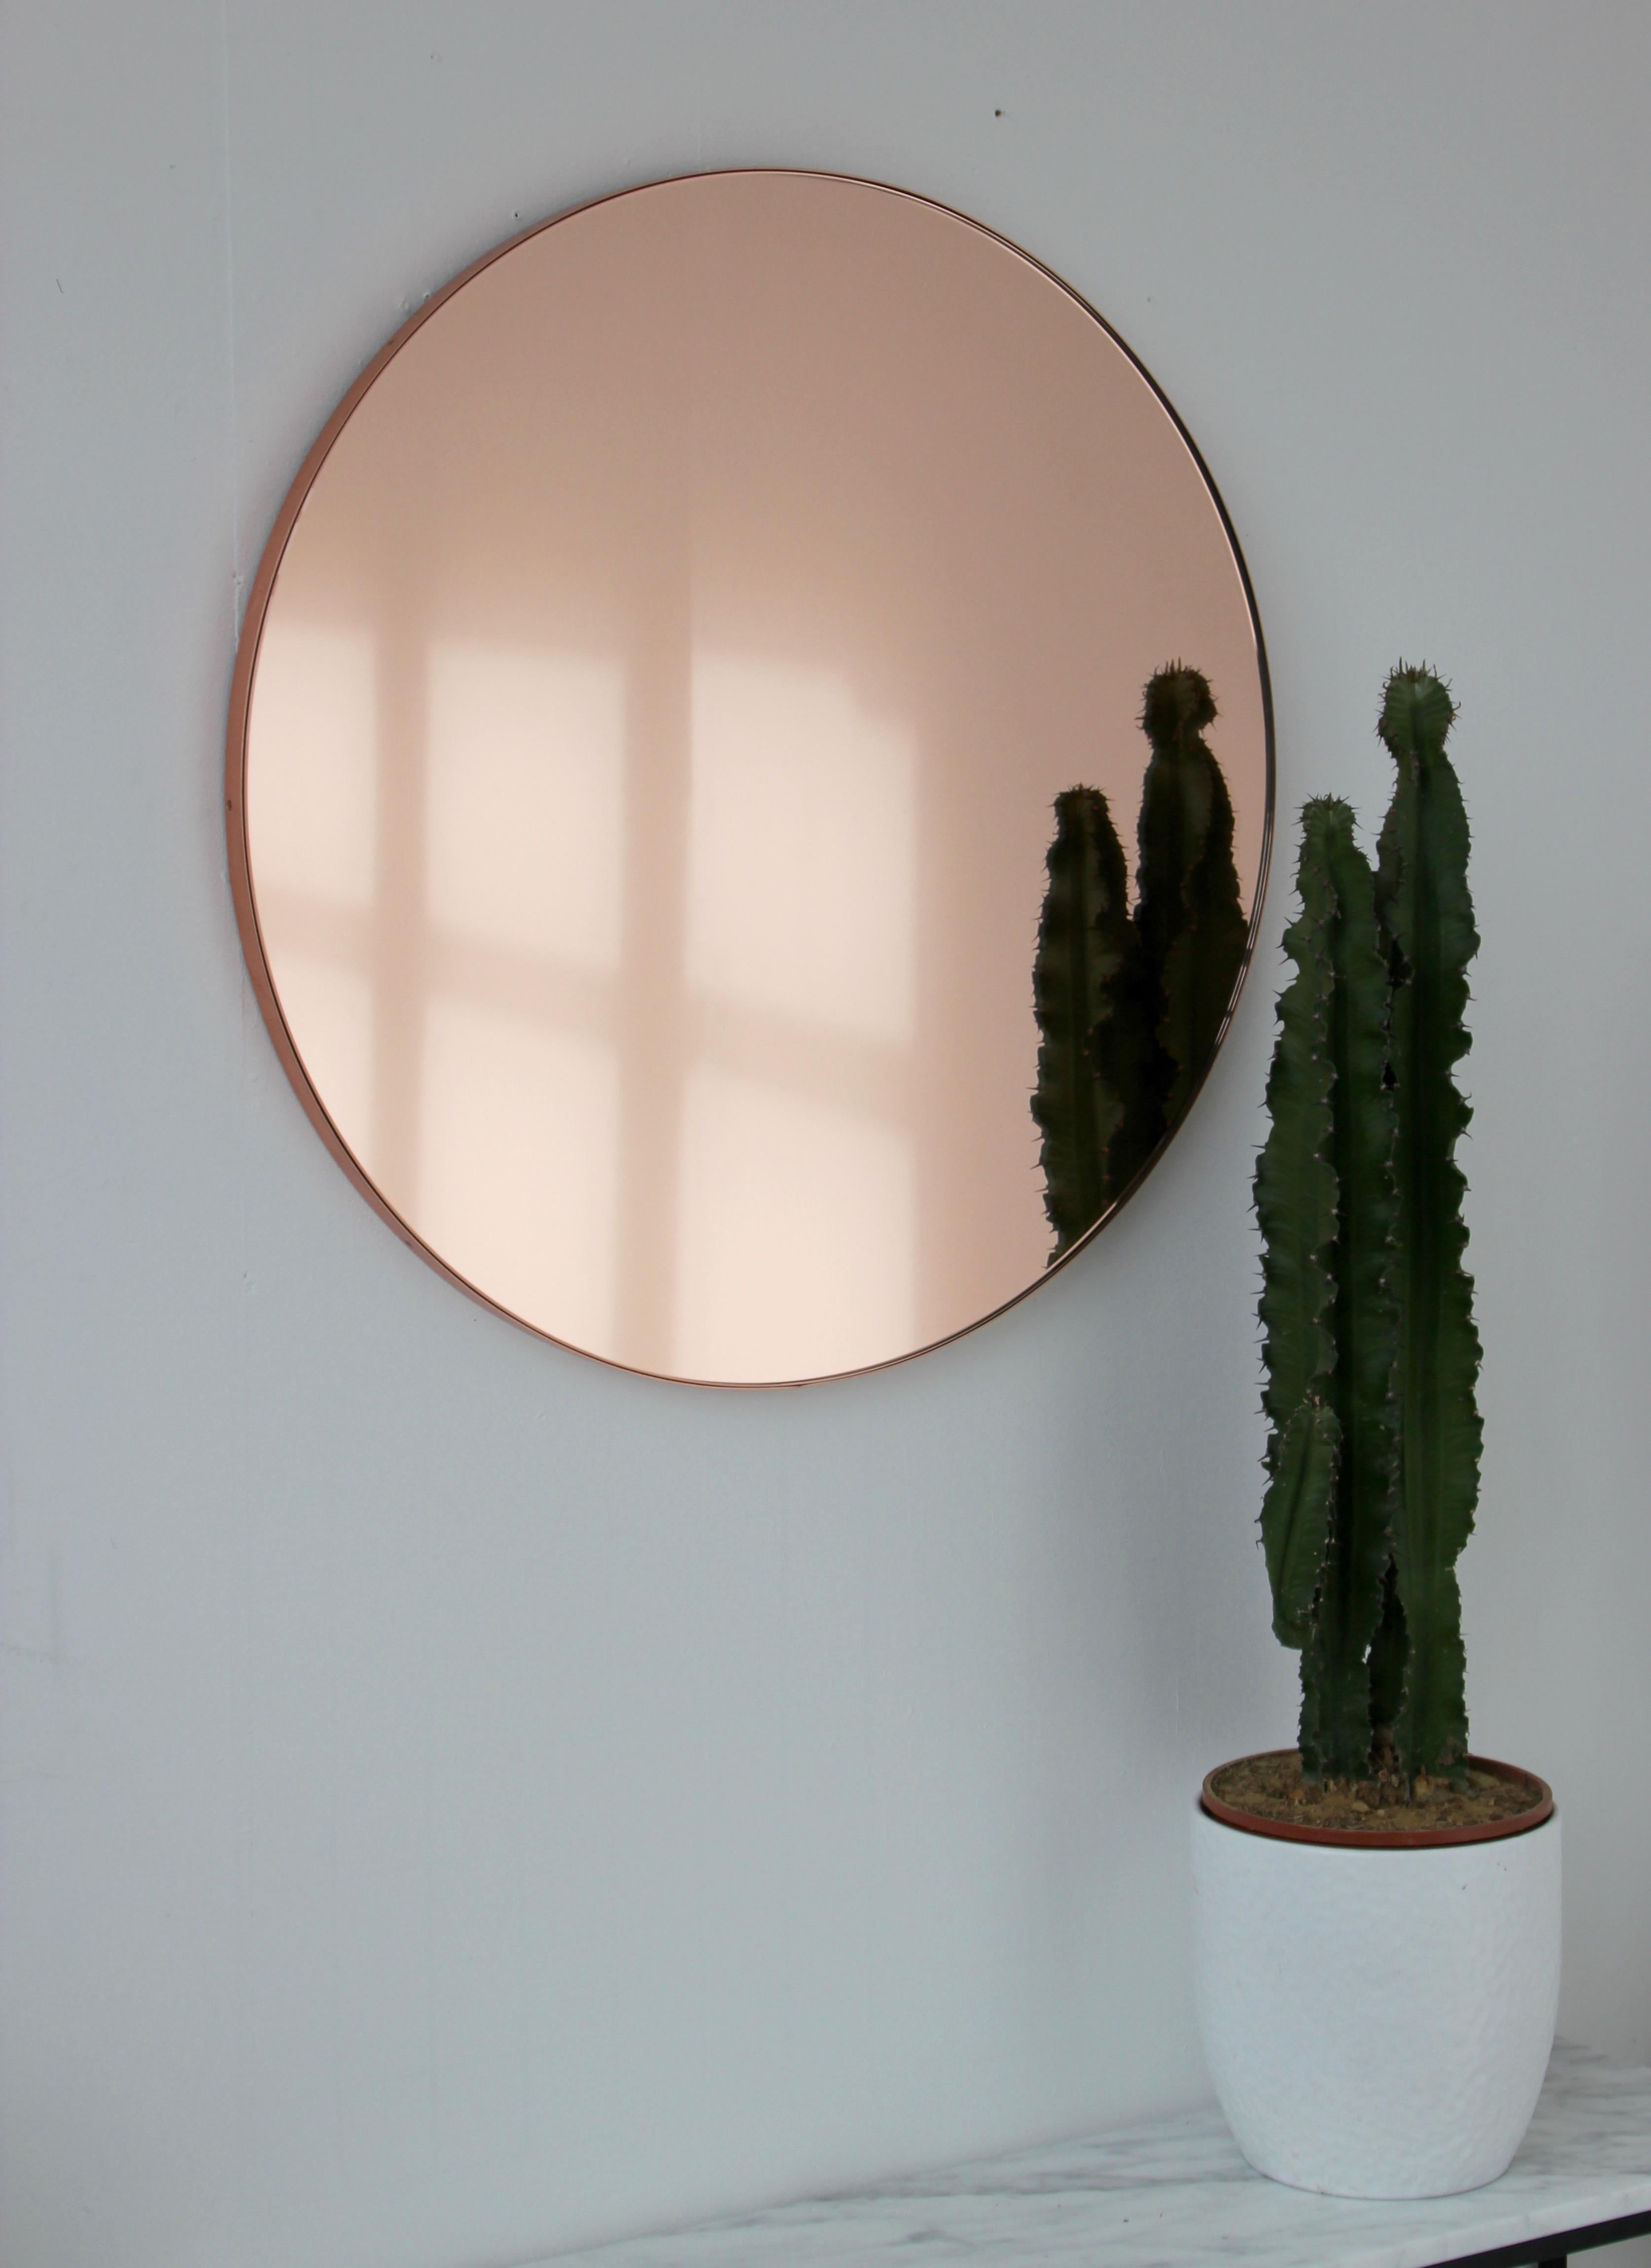 Contemporary Peach / Rose Gold tinted Orbis™ round mirror with a brushed copper frame. The detailing and finish, including visible copper plated screws, emphasise the craft and quality feel of the mirror. Designed and handcrafted in London,